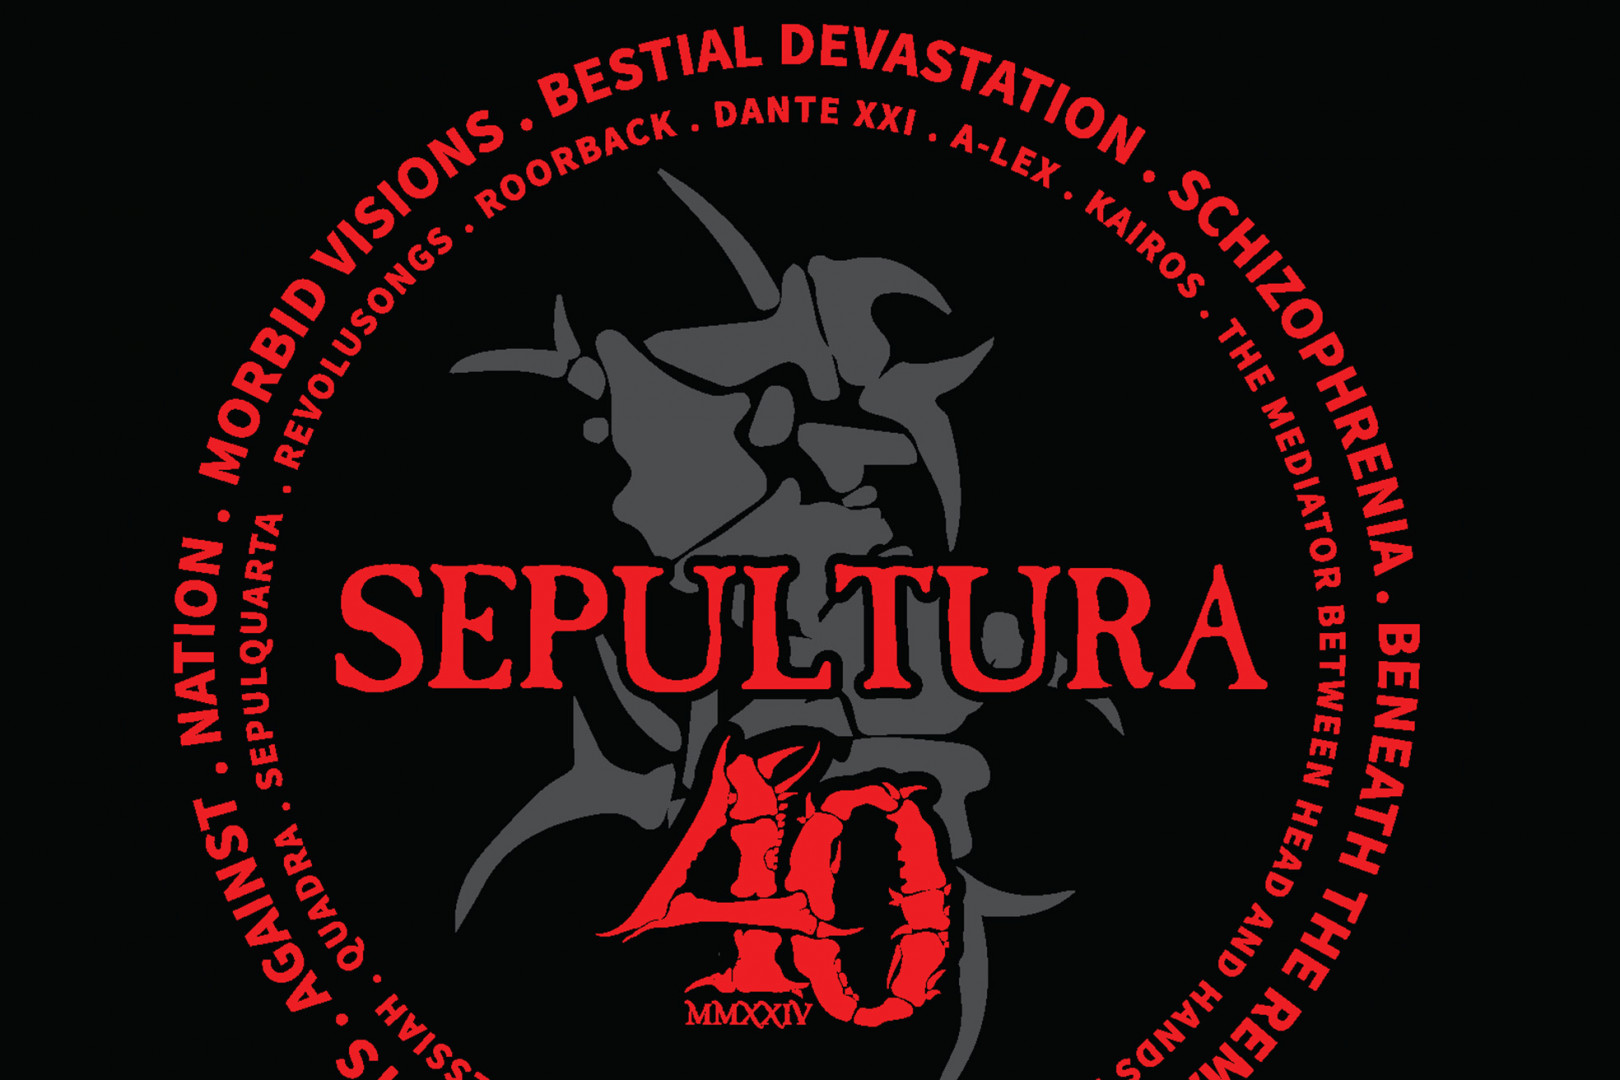 Sepultura to end in 18 months